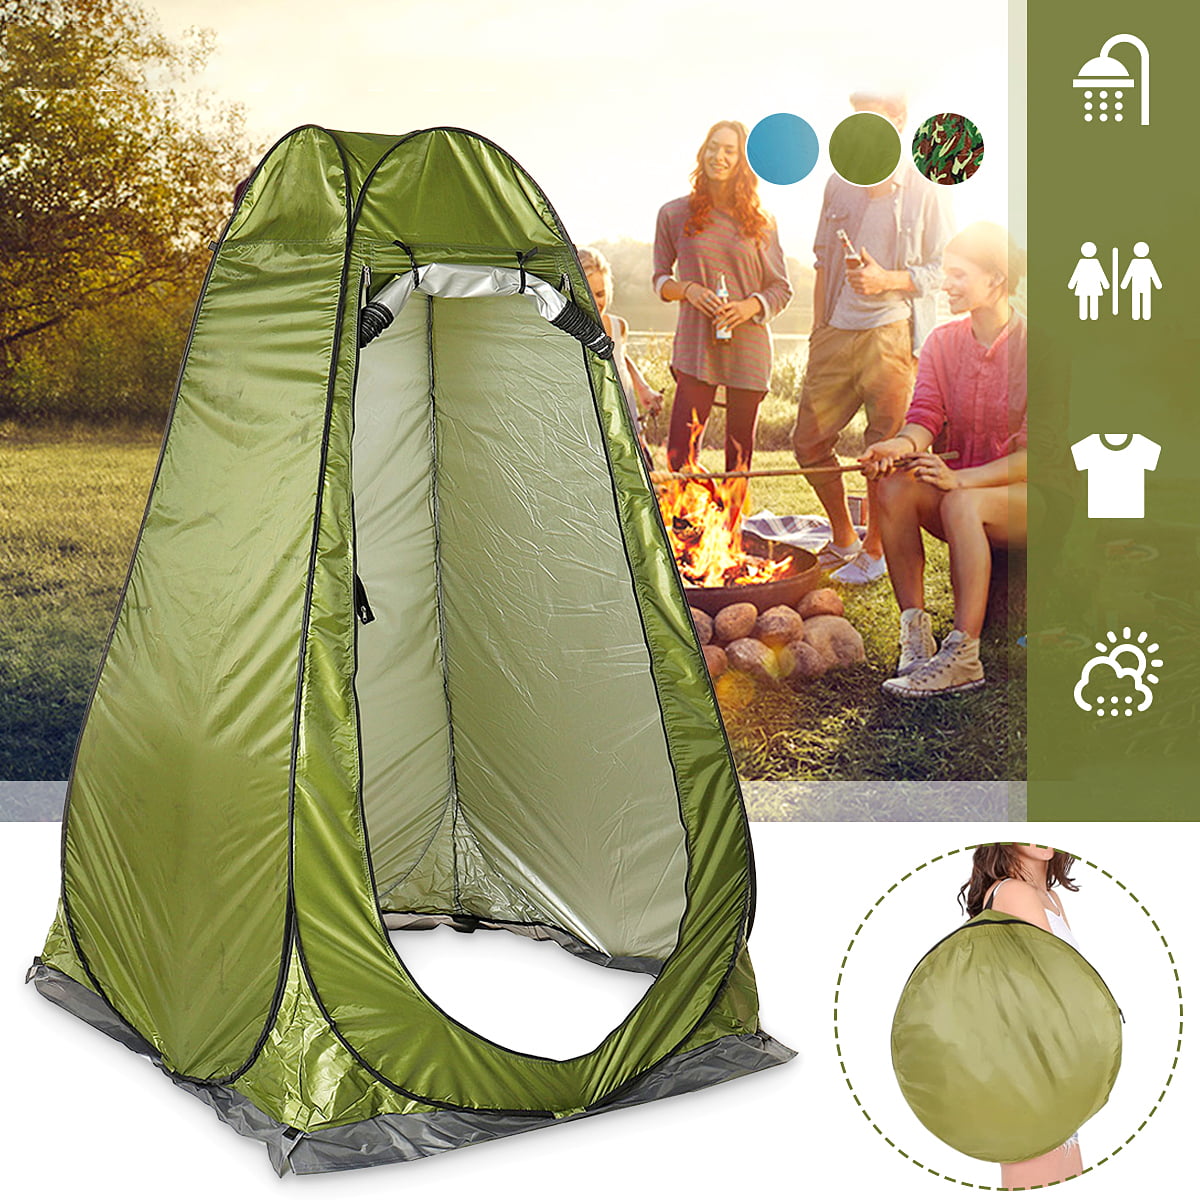 Privacy Tent For Portable Toilet with Folding Camping Toilet Chair Commode Pop Up Potty Camping Privacy Shelters Instant Portable Outdoor Shower Tent,Rain Shelter for Camping Beach Changing Dress Room